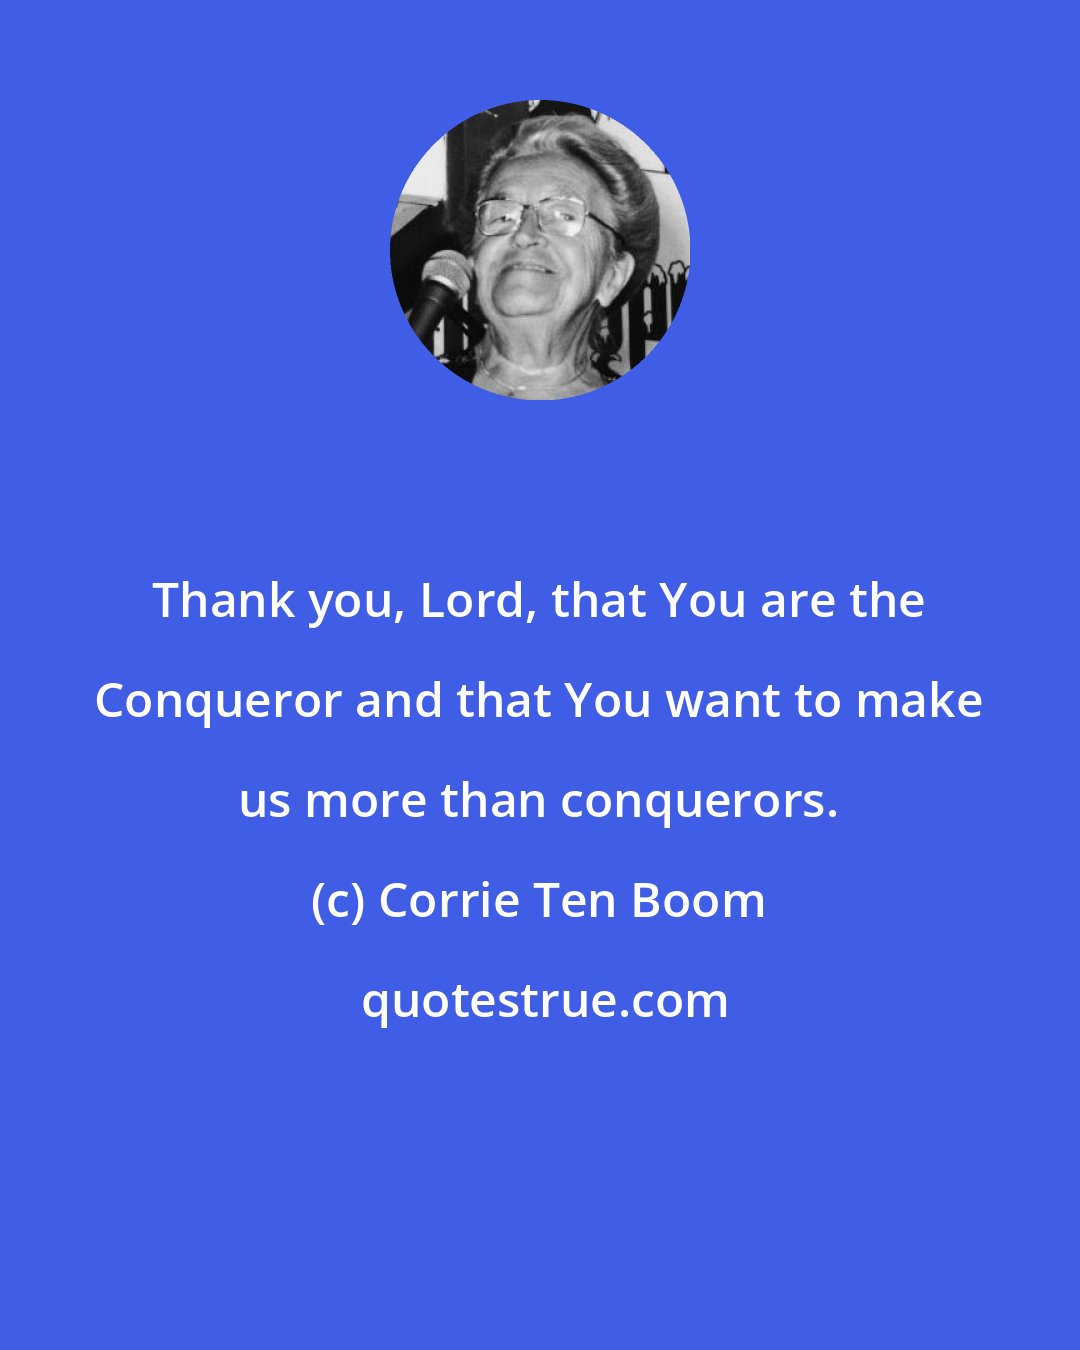 Corrie Ten Boom: Thank you, Lord, that You are the Conqueror and that You want to make us more than conquerors.